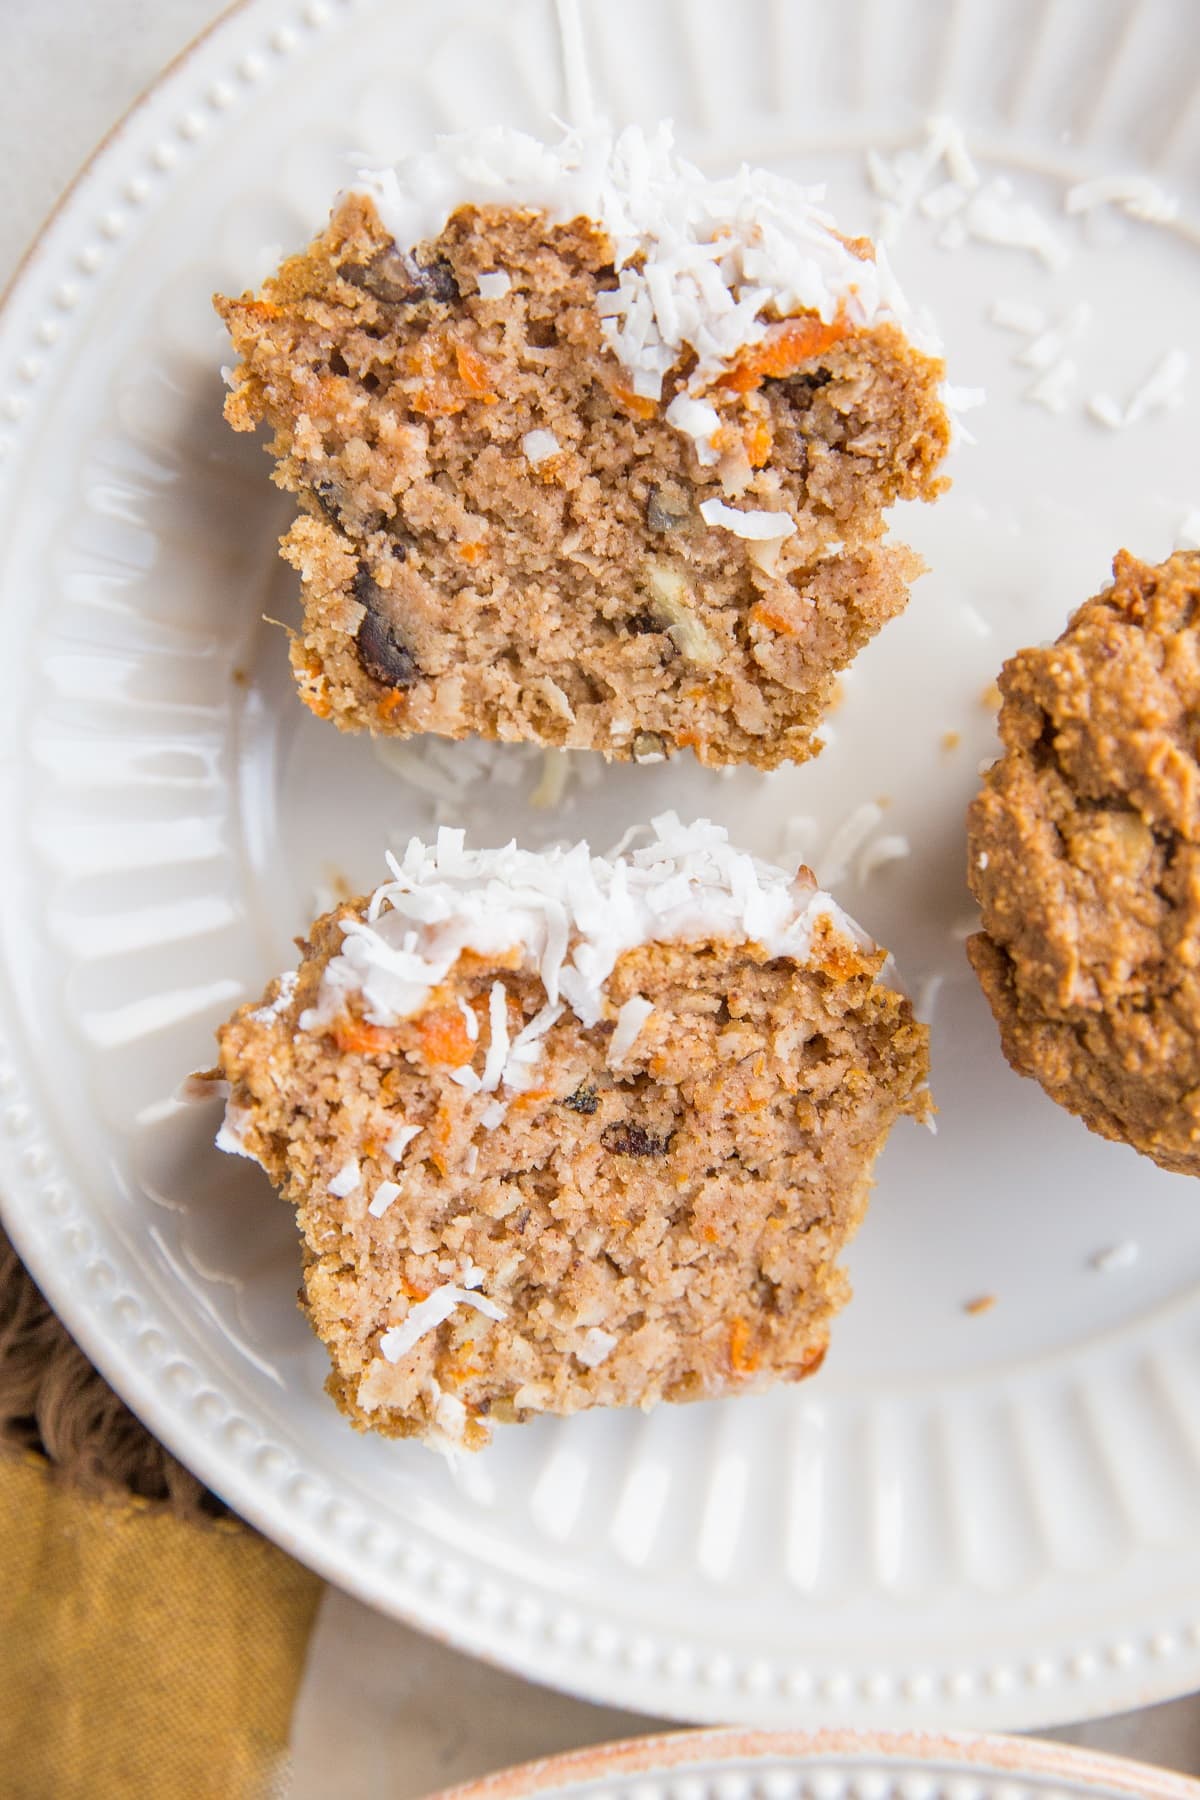 Carrot Cake Muffin sliced in half on a plate so you can see the inside